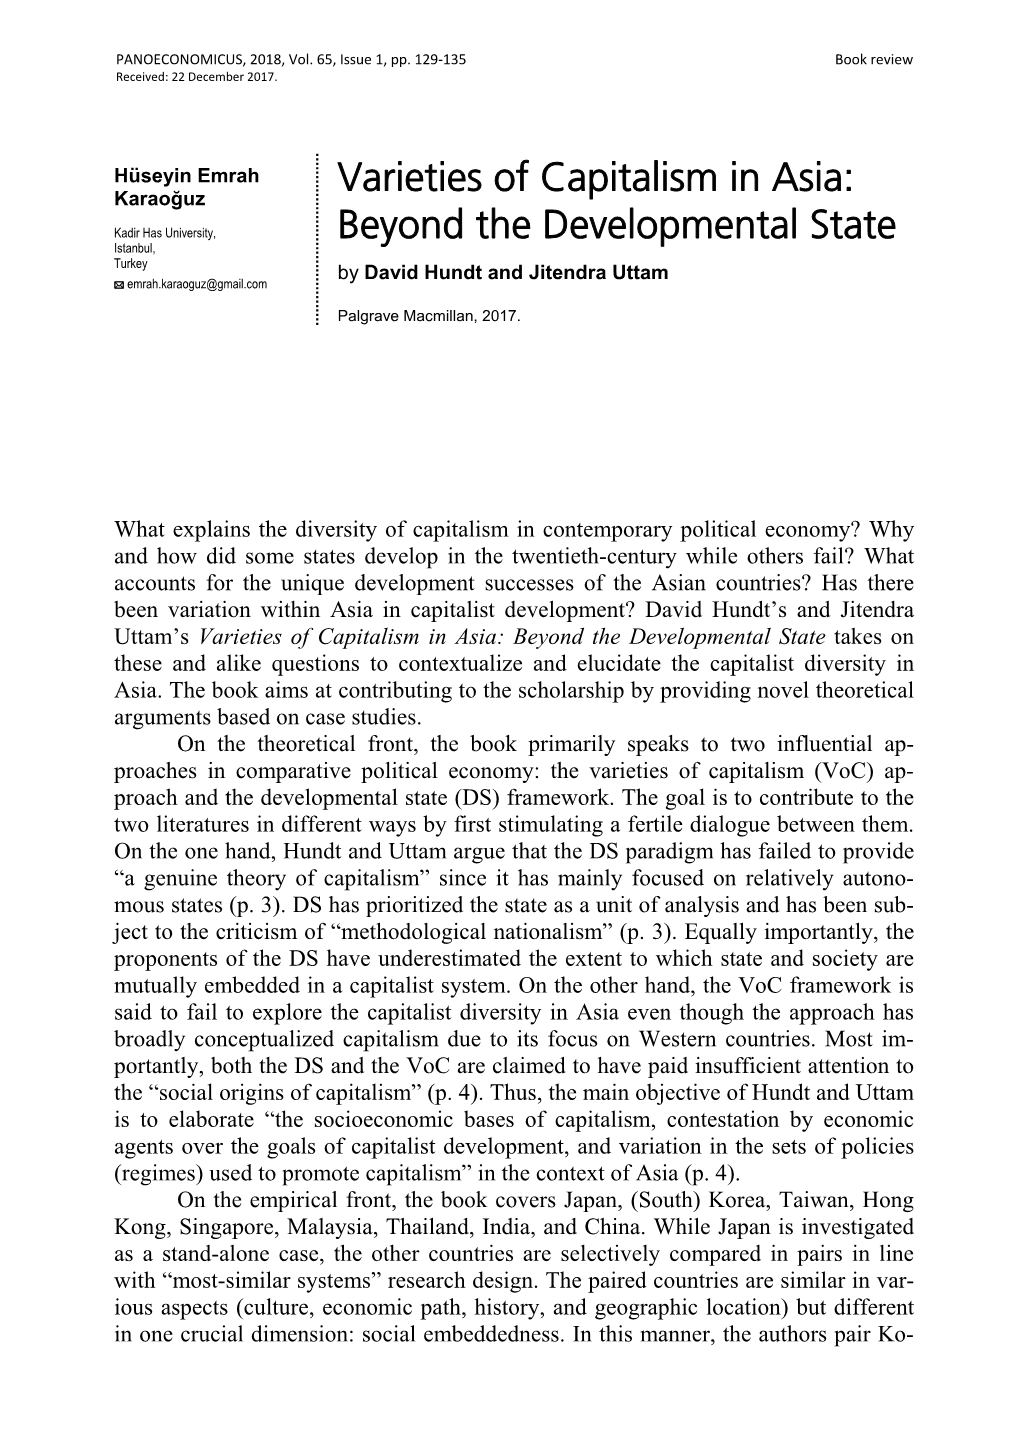 Varieties of Capitalism in Asia: Beyond the Developmental State Takes on These and Alike Questions to Contextualize and Elucidate the Capitalist Diversity in Asia